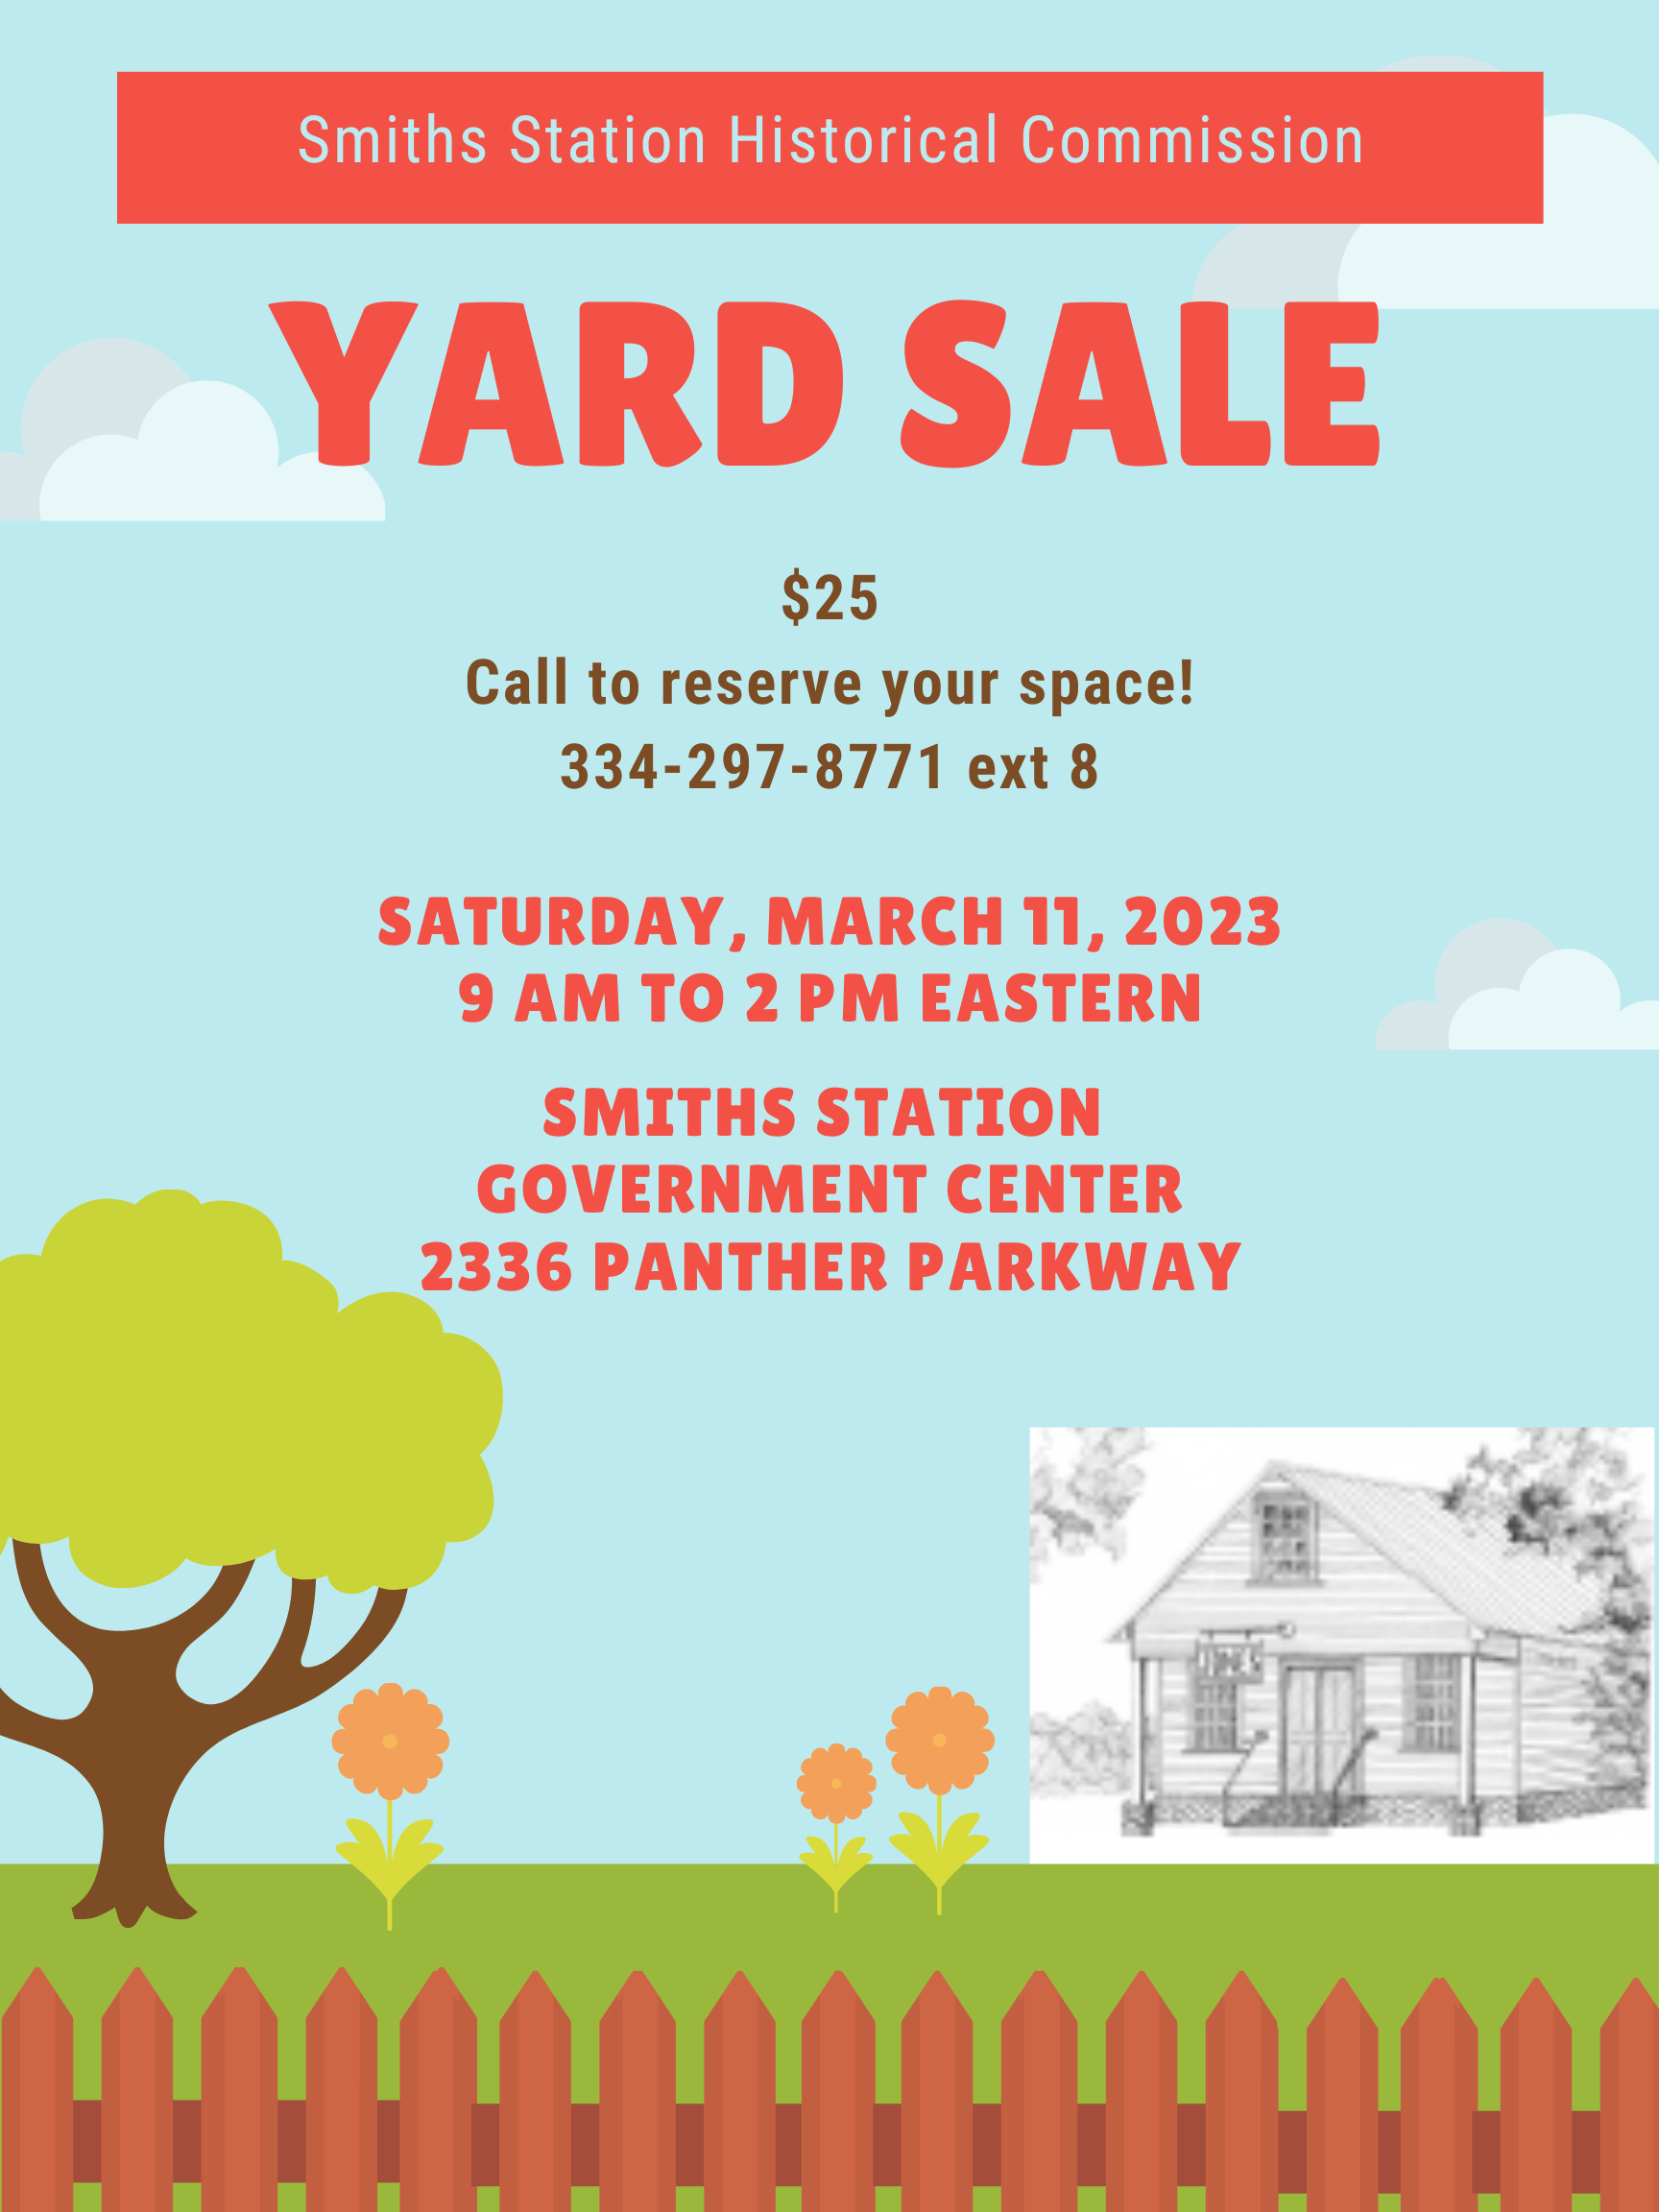 Historical Commission to Host First Yard Sale Fundraiser